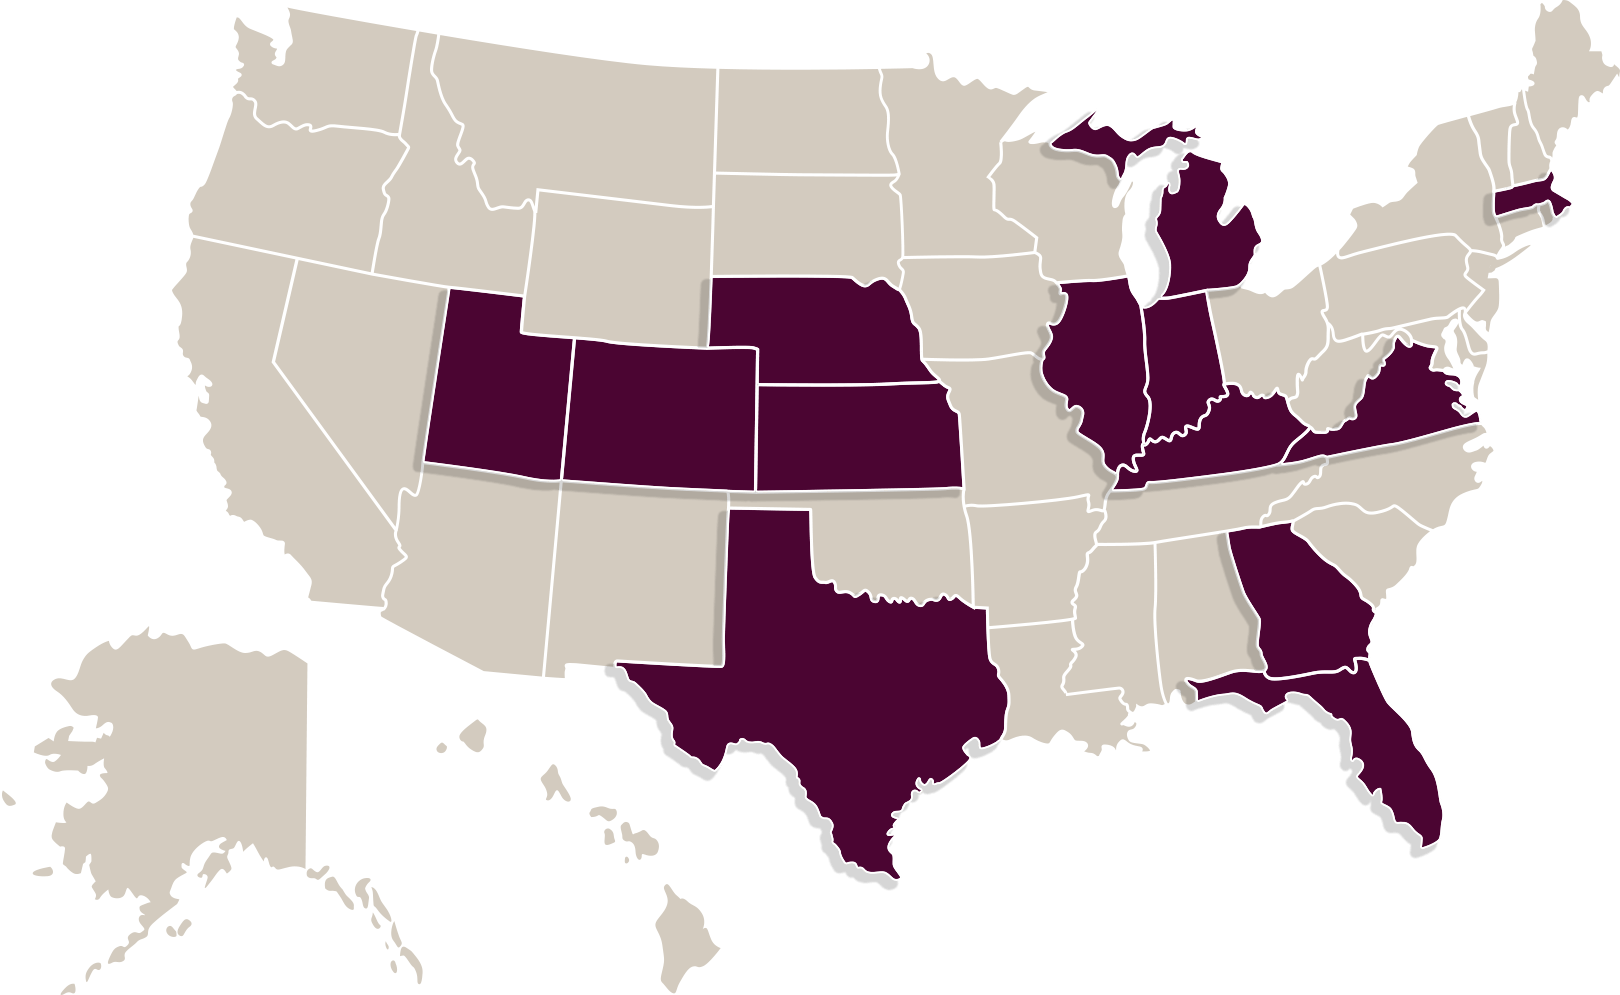 United States map showing States where Mitsch is NCARB-certified